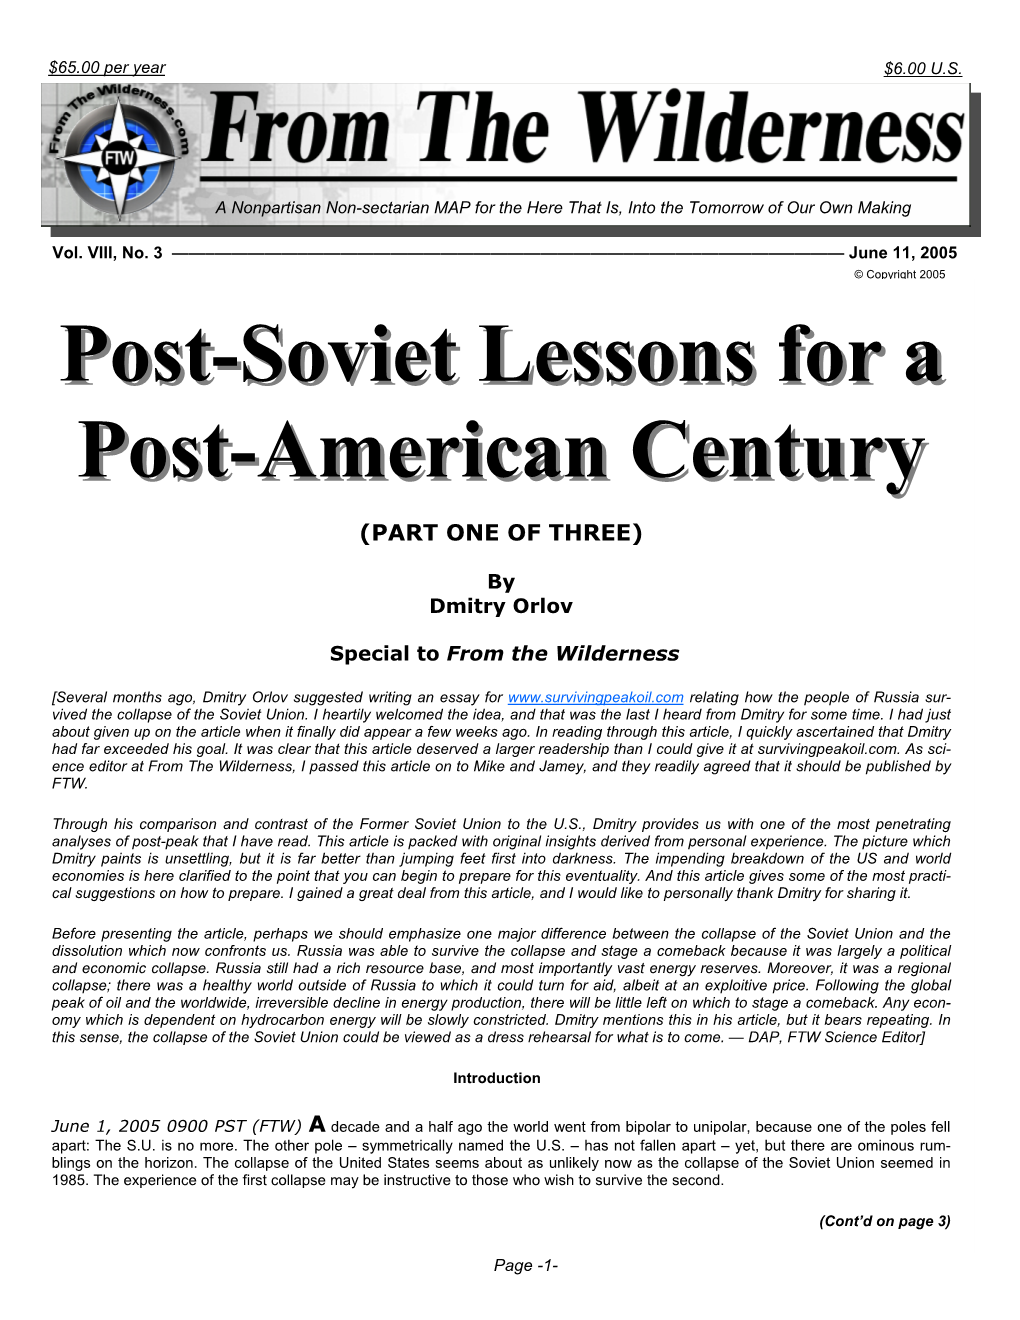 Post-Soviet Lessons for a Post-American Century